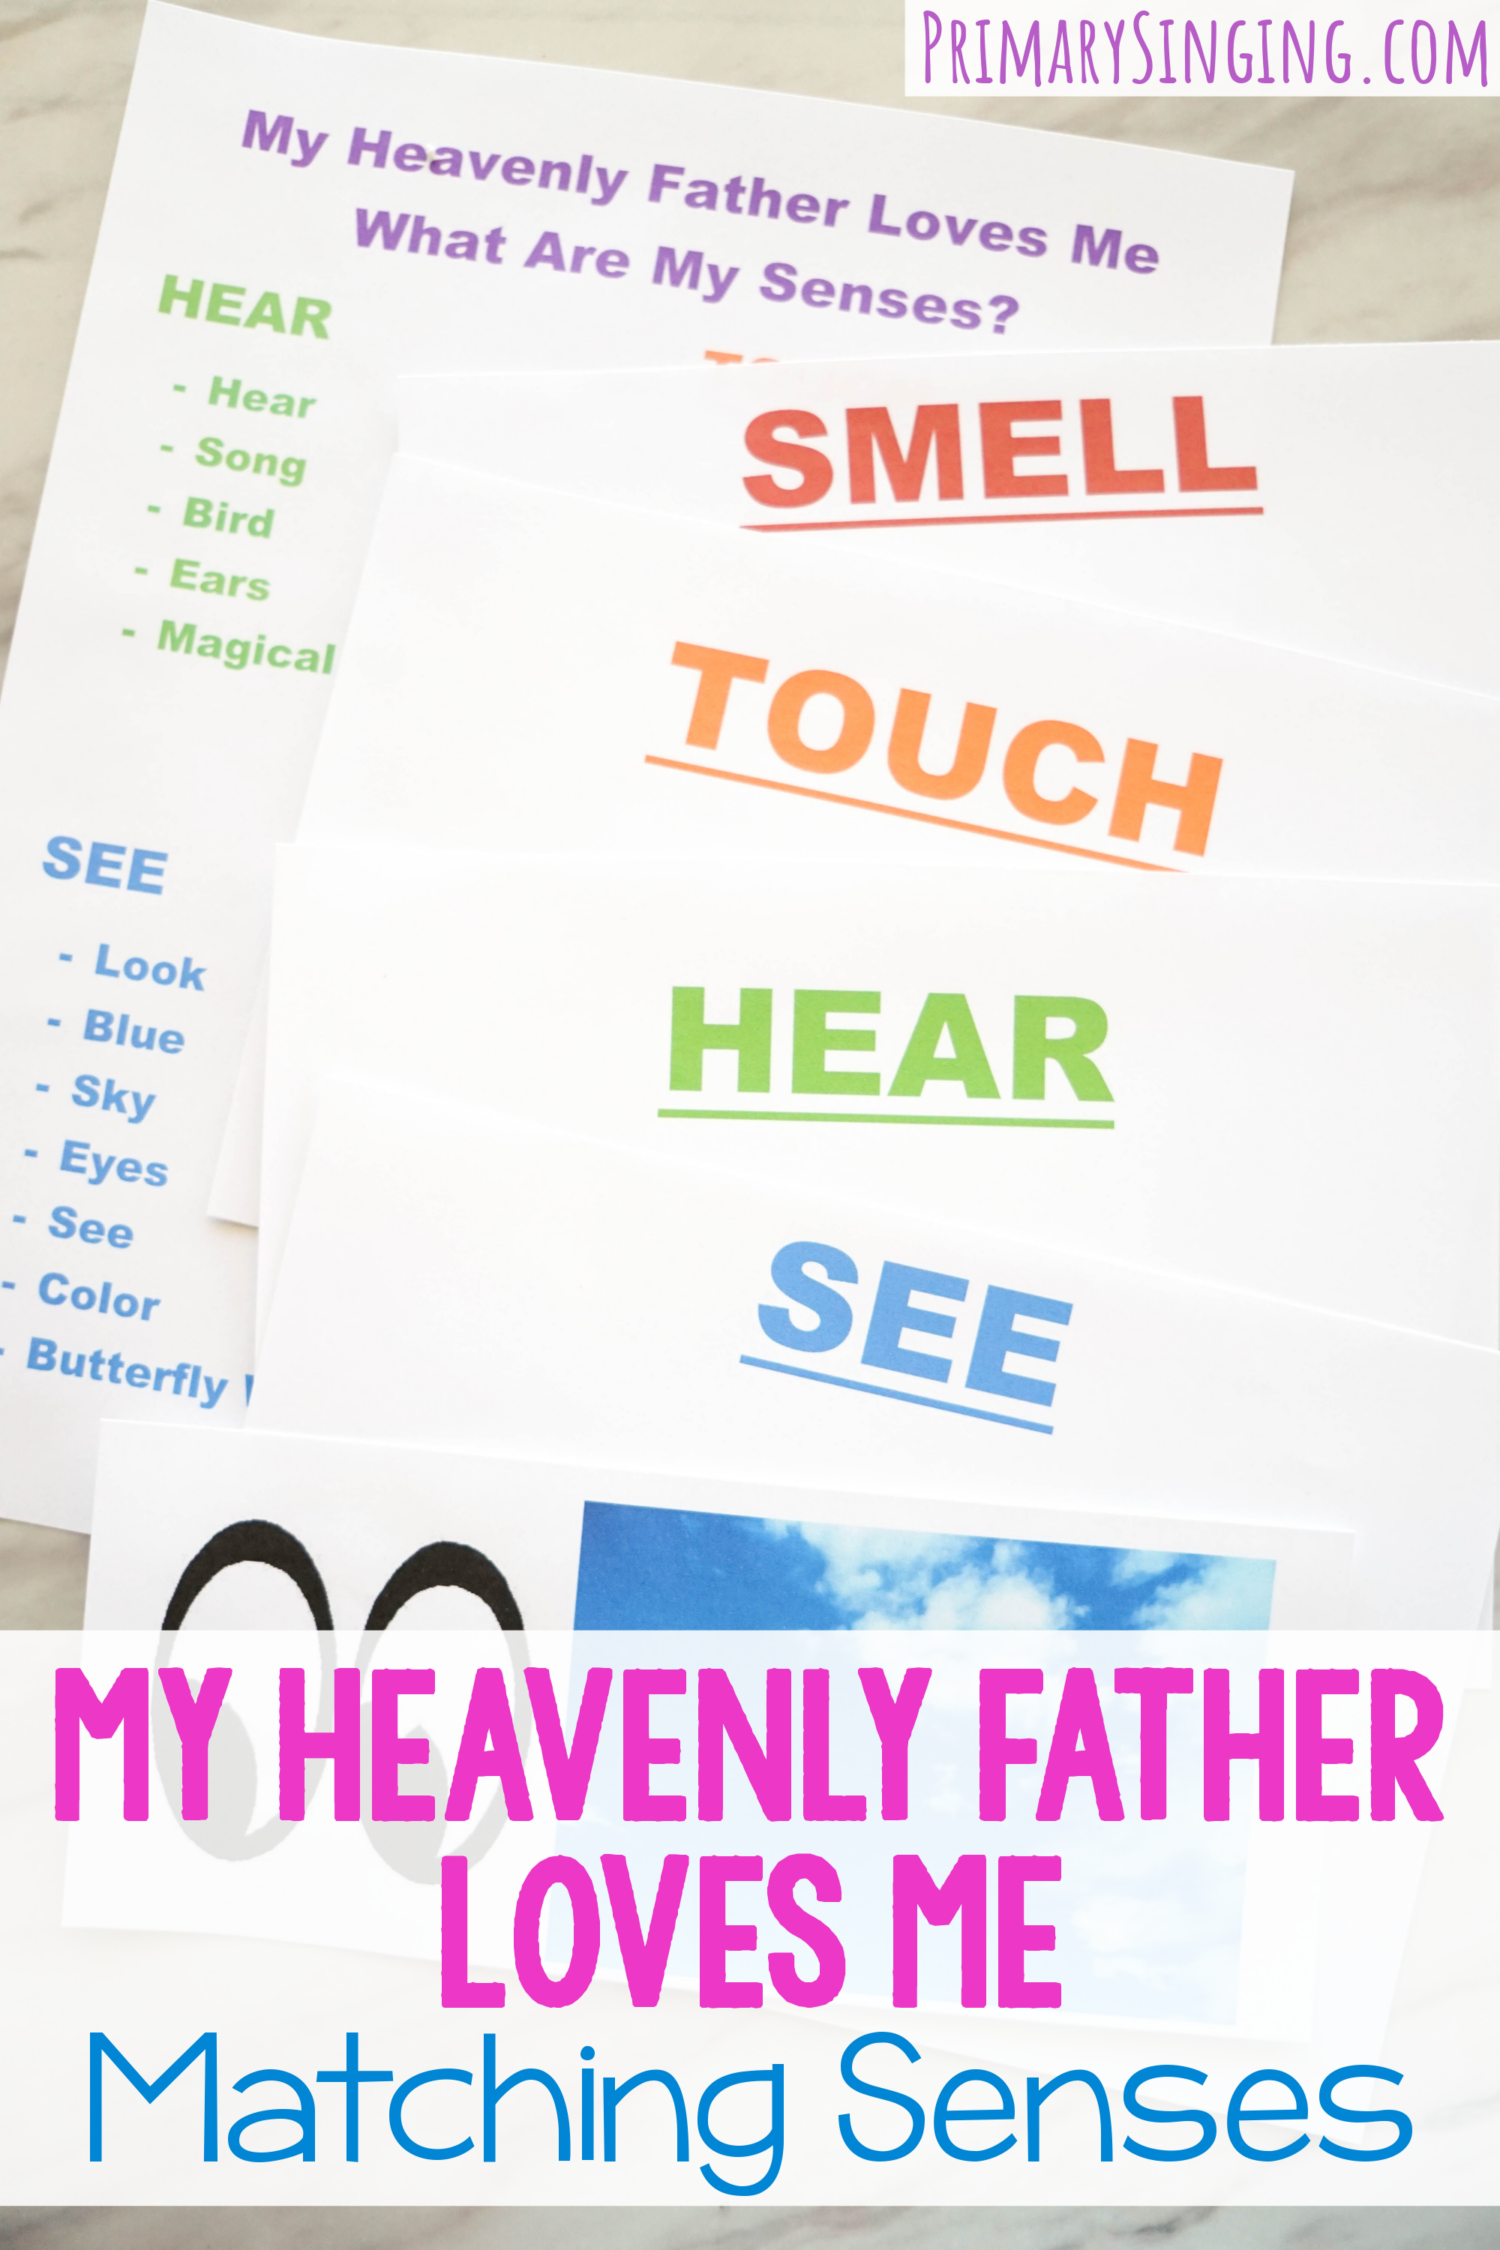 My Heavenly Father Loves Me Matching Senses fun singing time idea to engage with each of the senses references throughout this song lyrics. Fun ways to teach this song with printable song helps for LDS Primary music leaders.